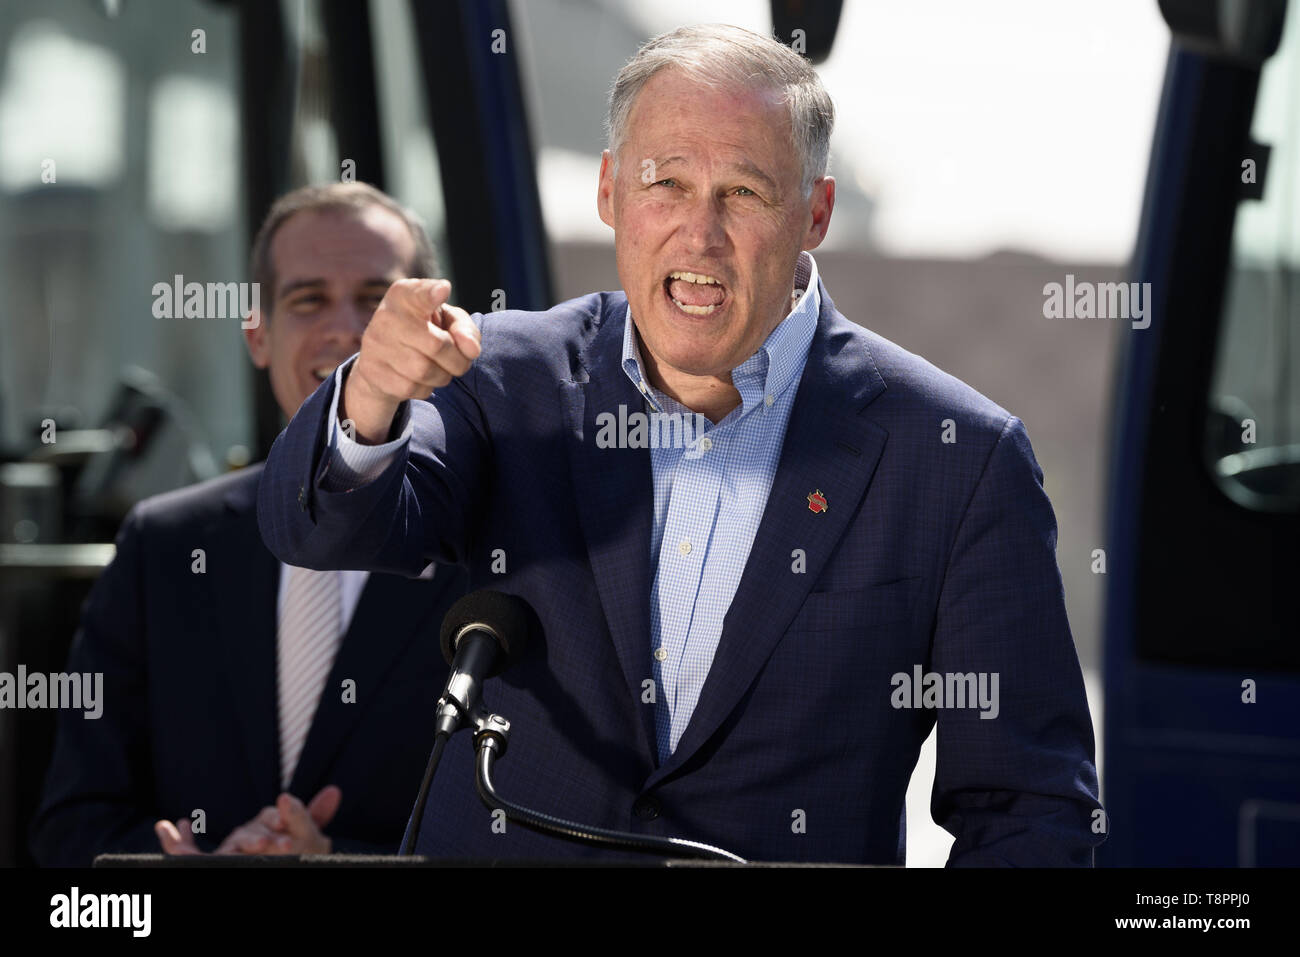 Los Angeles, CA, USA. 3rd May, 2019. Washington State Governor and Democratic presidential candidate Jay Inslee seen speaking while making a gesture during his Climate Mission Tour in Los Angeles, California. Credit: Ronen Tivony/SOPA Images/ZUMA Wire/Alamy Live News Stock Photo